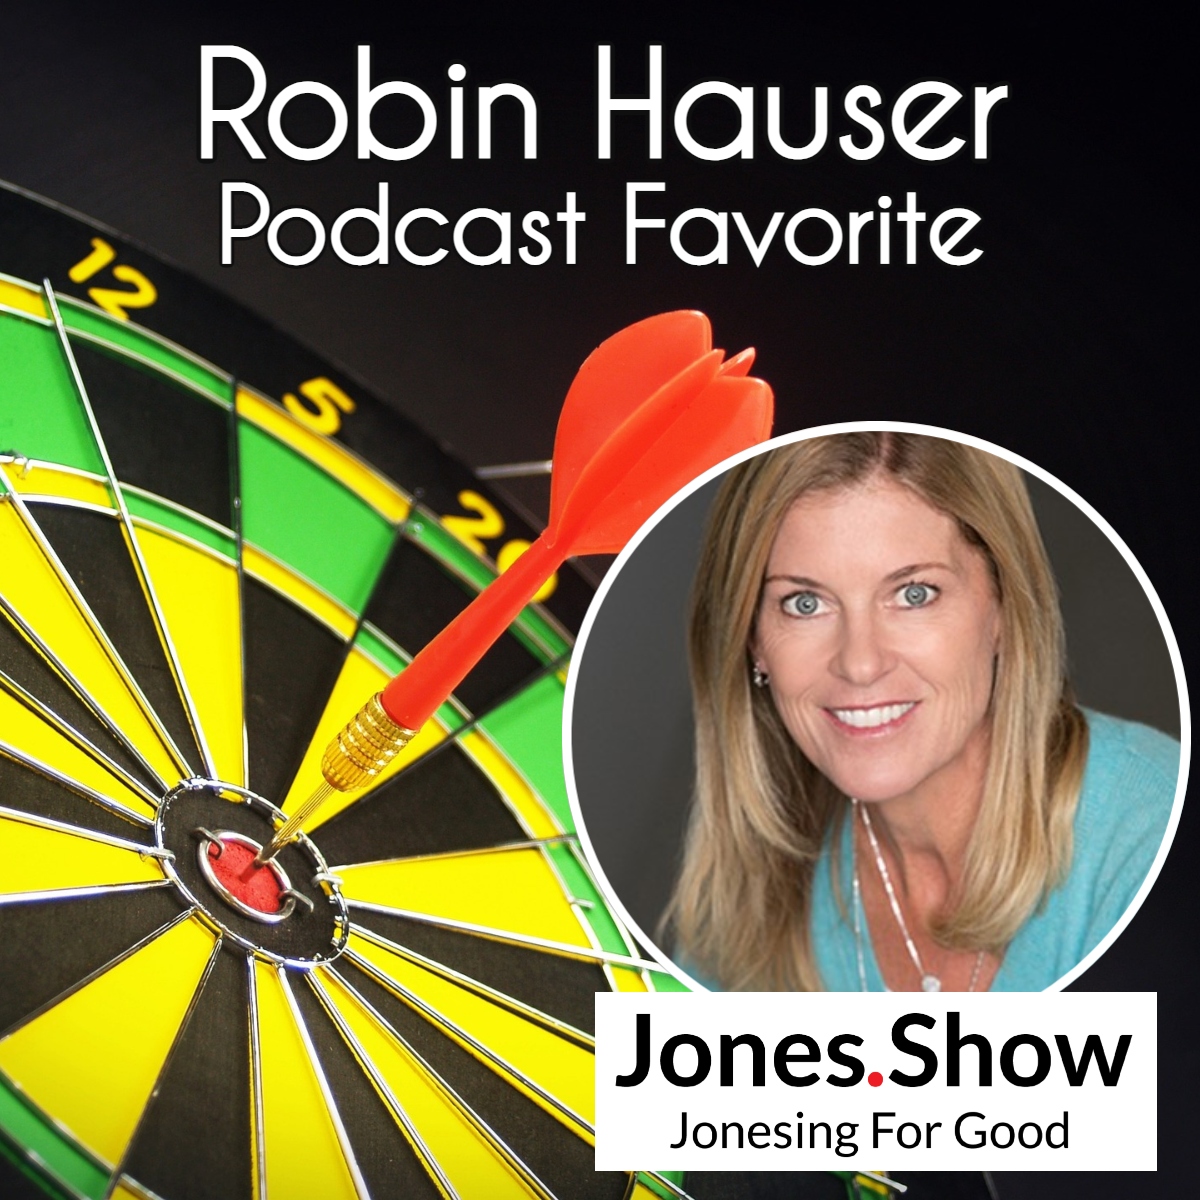 Yes, #documentary #filmmaker #RobinHauser is a JONES.SHOW favorite! Her thought-provoking work stands the test of time...
❤️LISTEN to #Bias Episode from 2018: traffic.libsyn.com/jonesshow/Robi…
❤️LISTEN to #WomenandMoney Episode from 2021: traffic.libsyn.com/jonesshow/Robi…